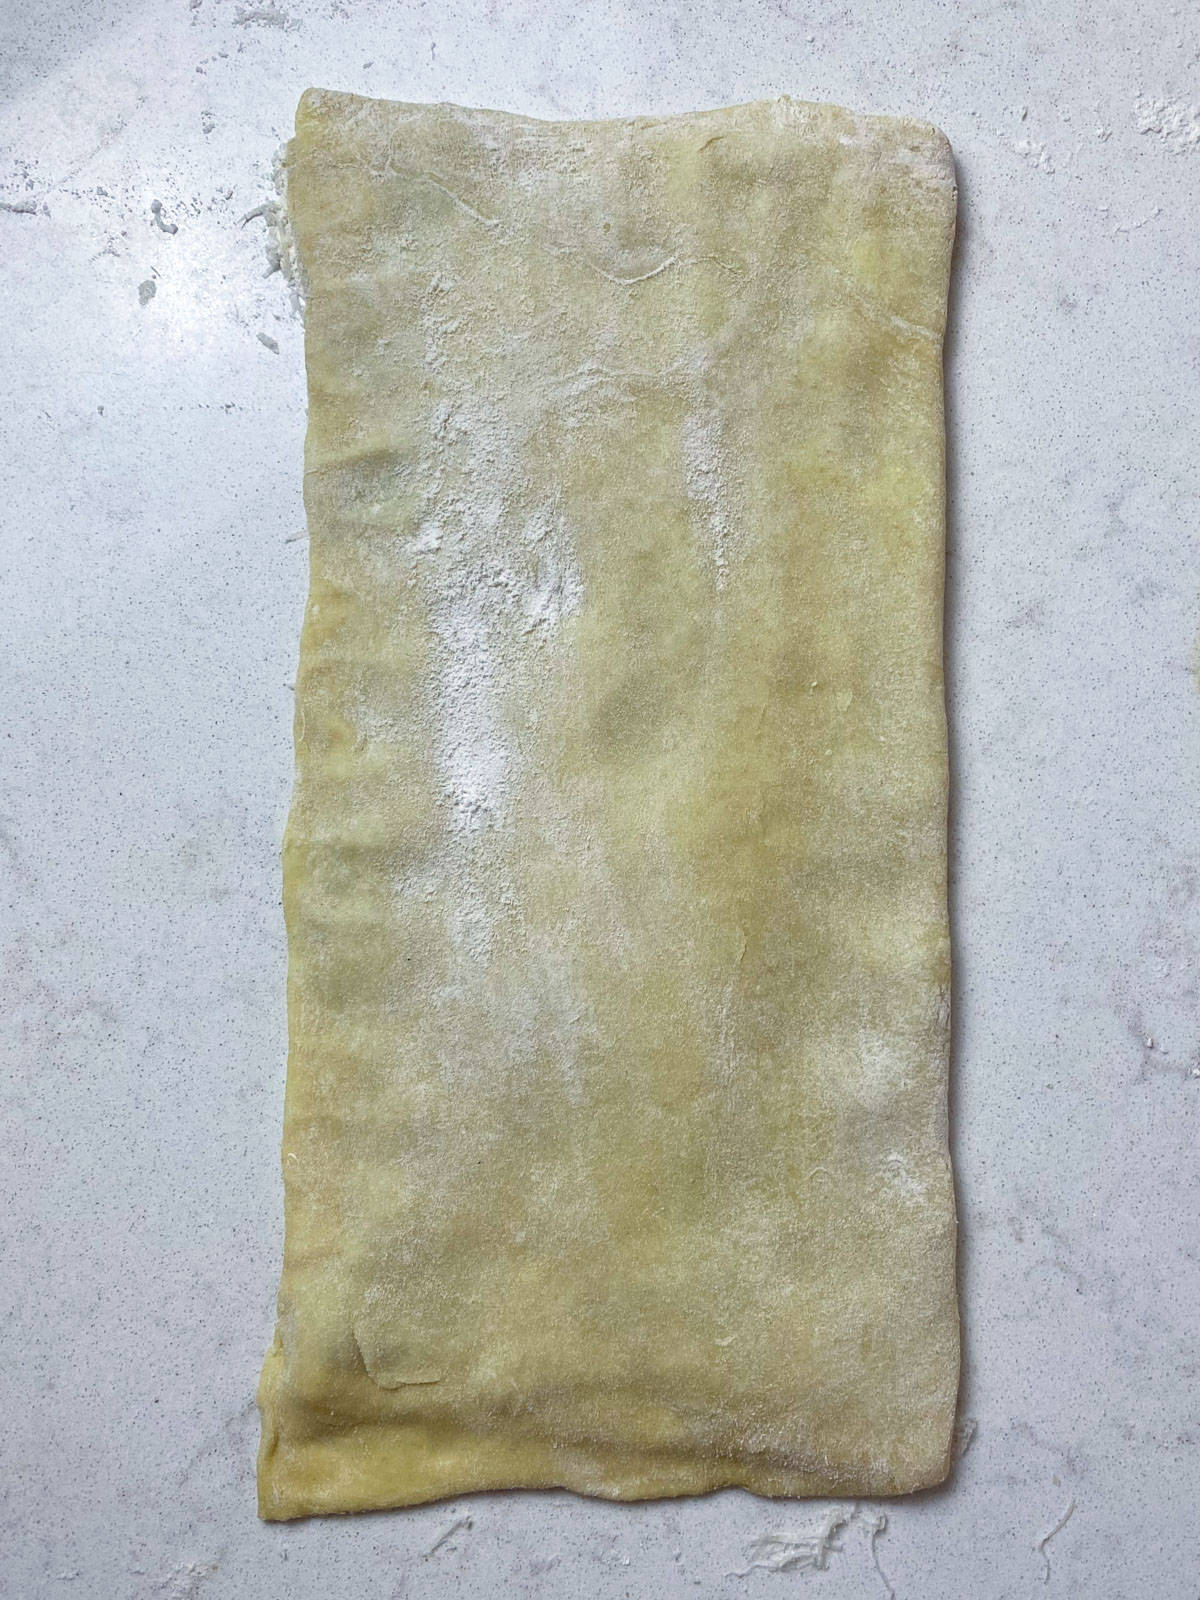 Fold the other half of the puff pastry over the olive tapenade and seal the edges.